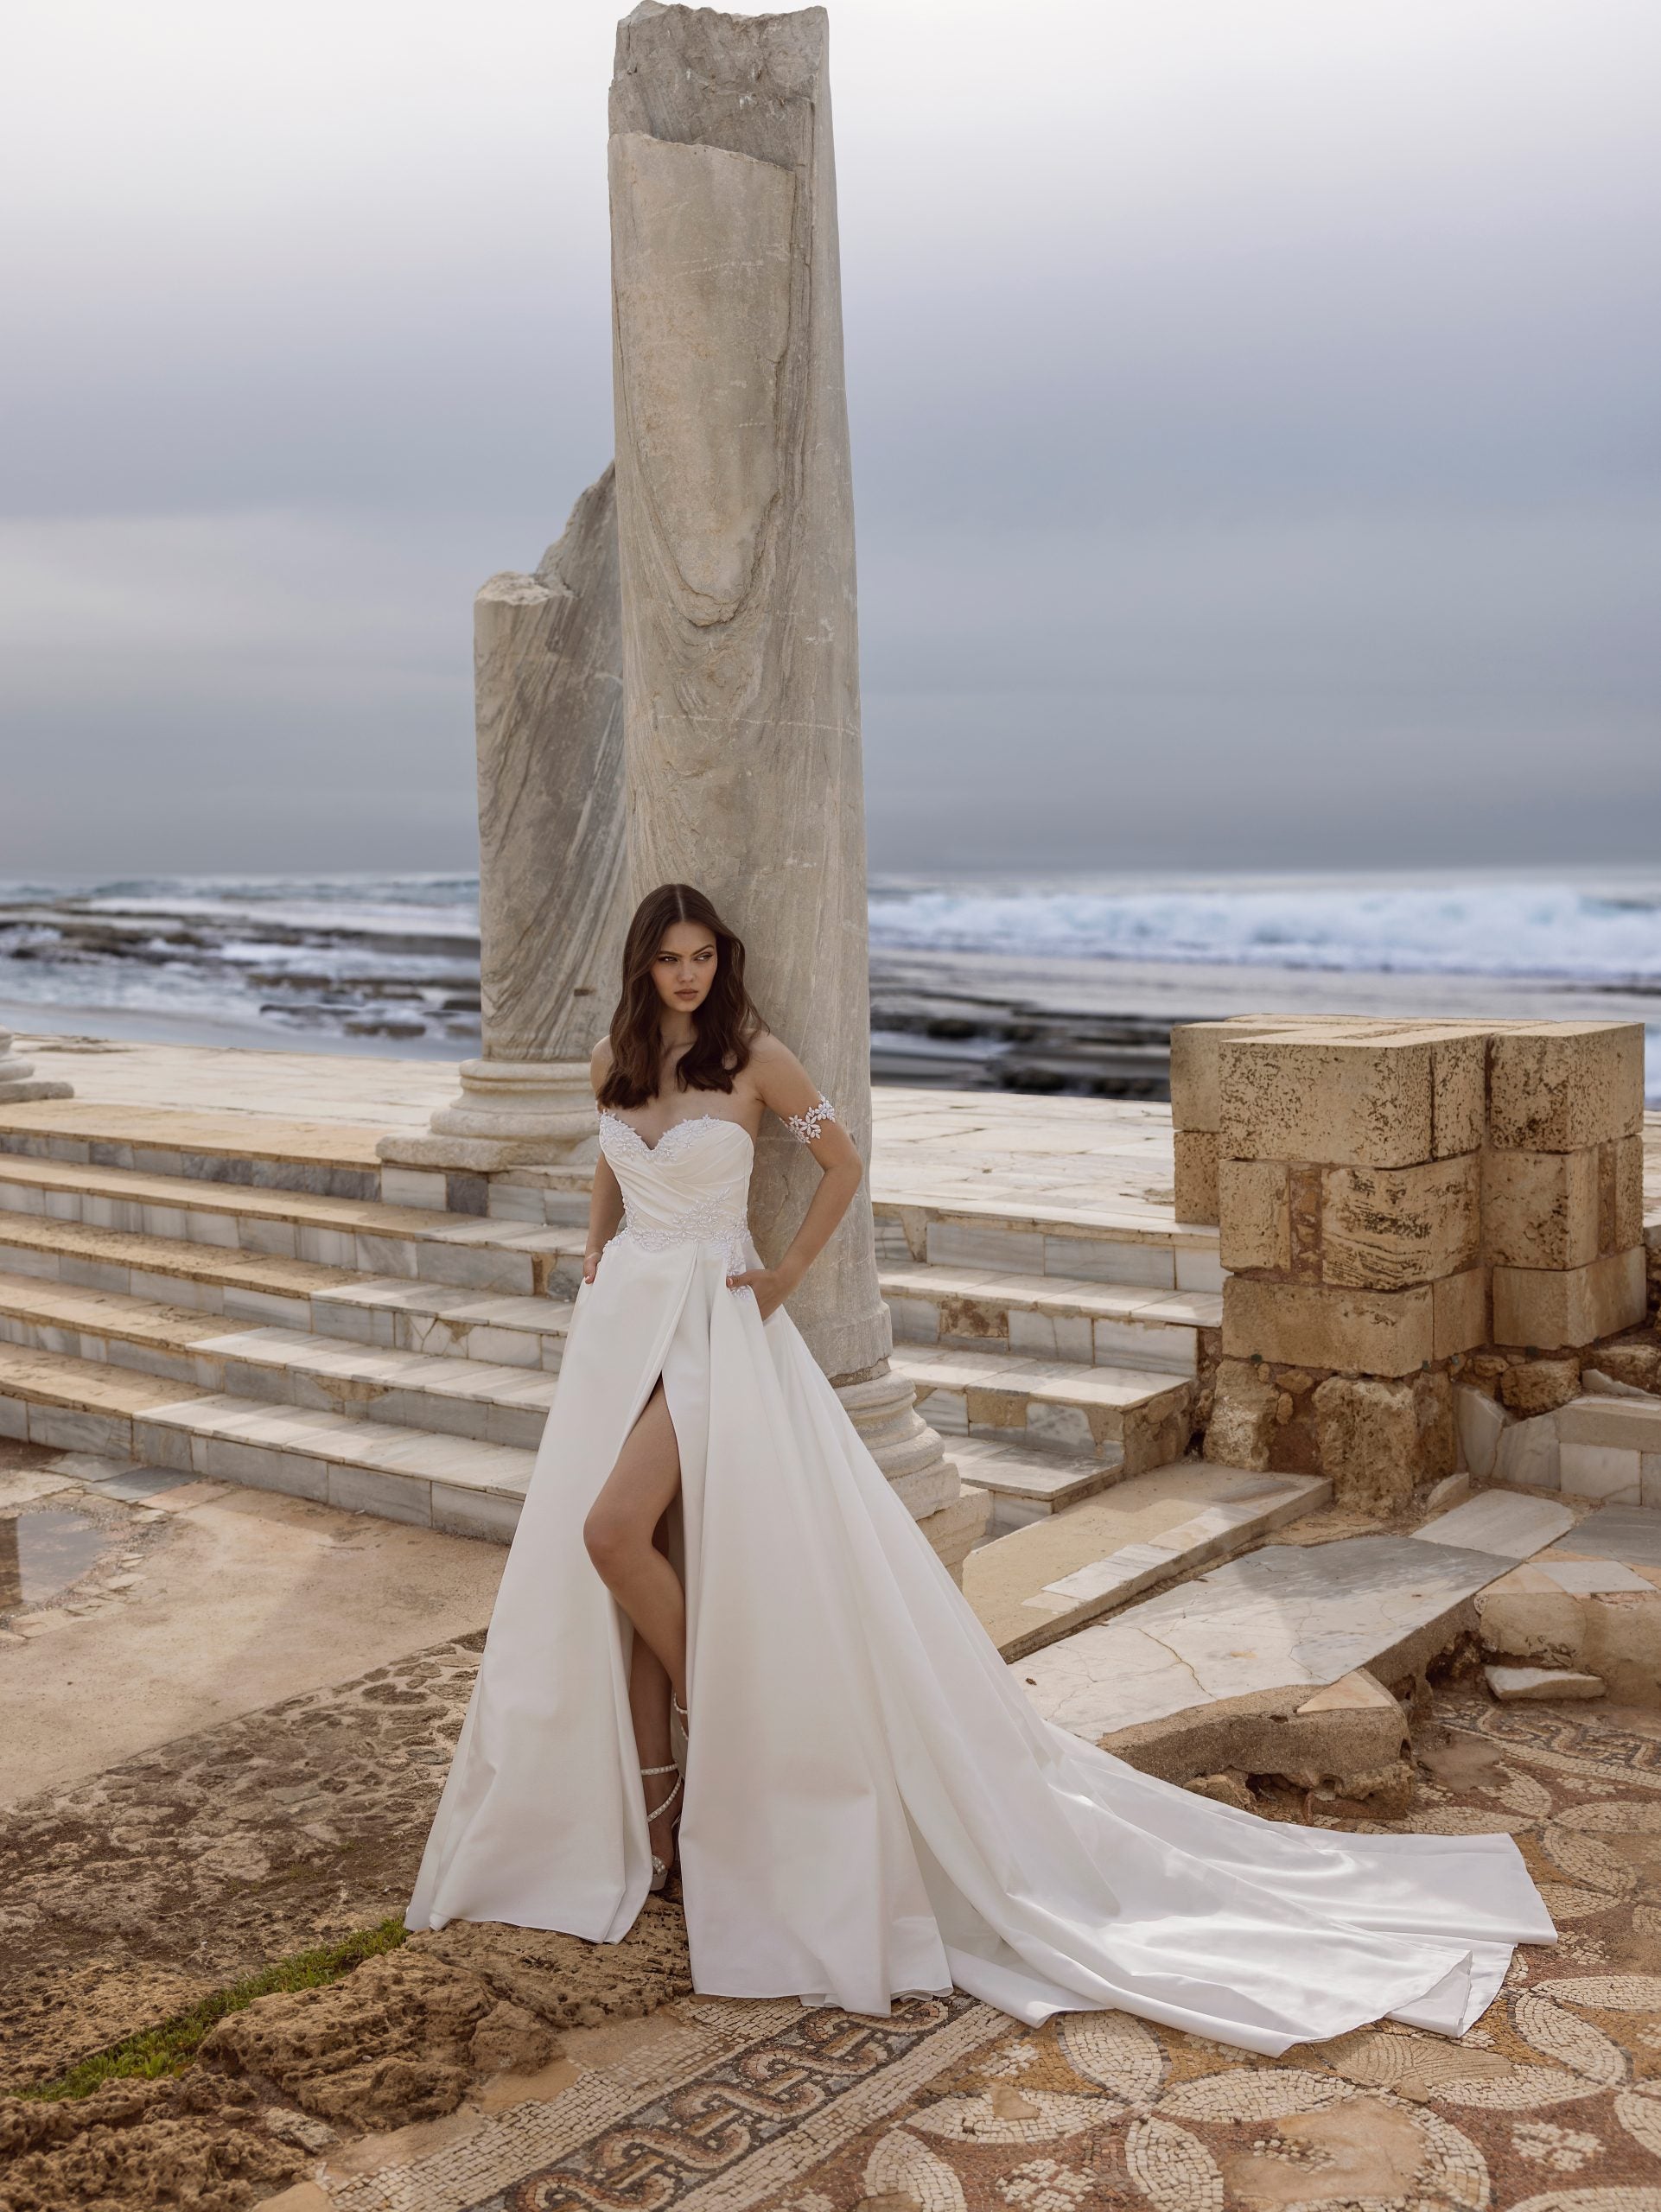 Strapless Ball Gown Wedding Dress With Swetheart Neckline by Love by Pnina Tornai